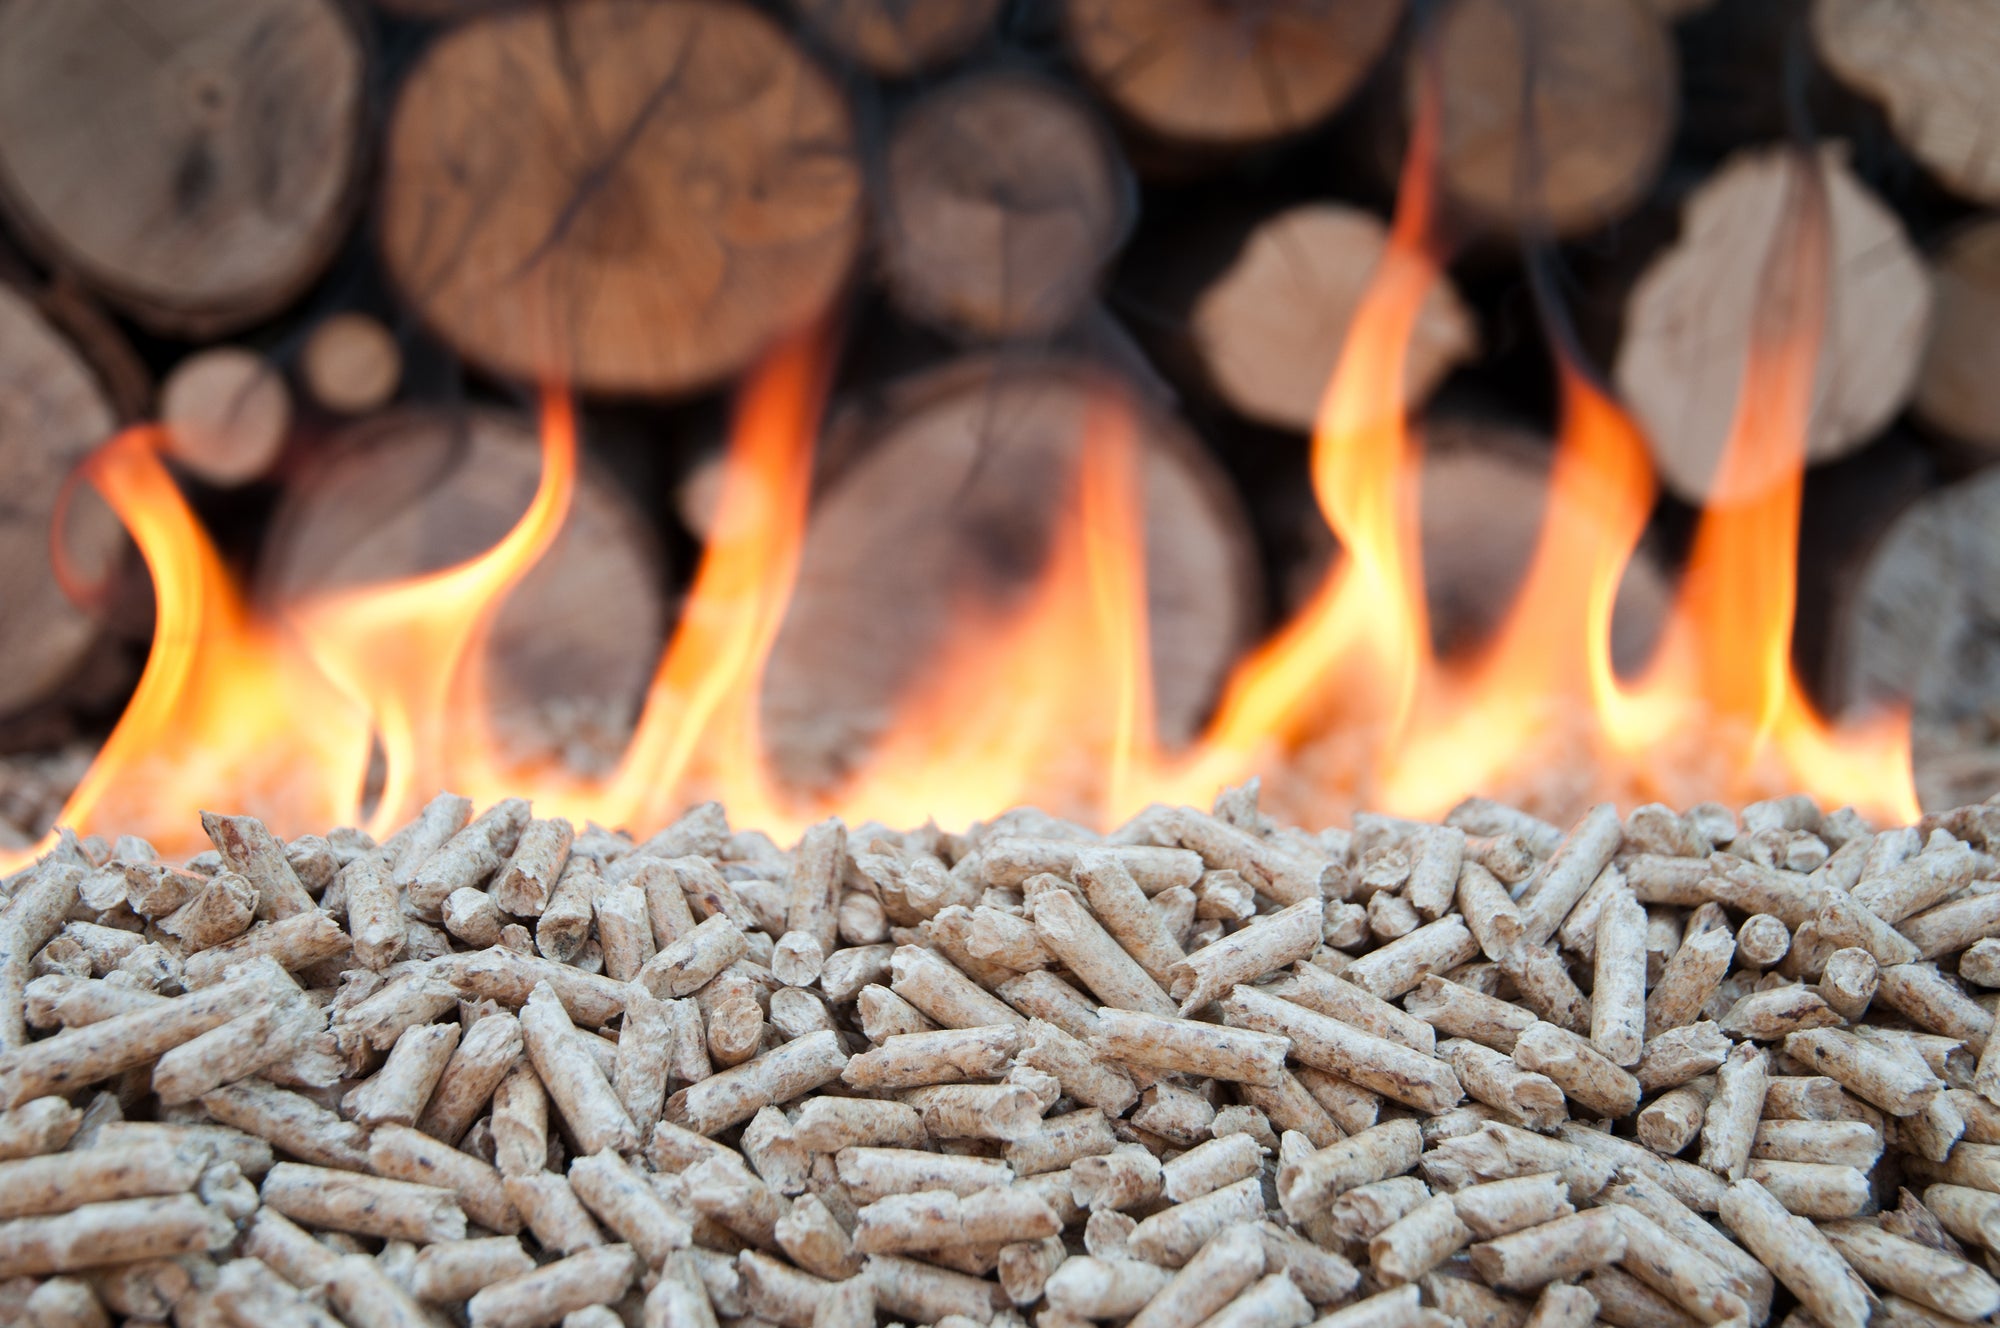 The Russian Invasion of Ukraine is Pushing European Wood Pellet Prices to New Highs